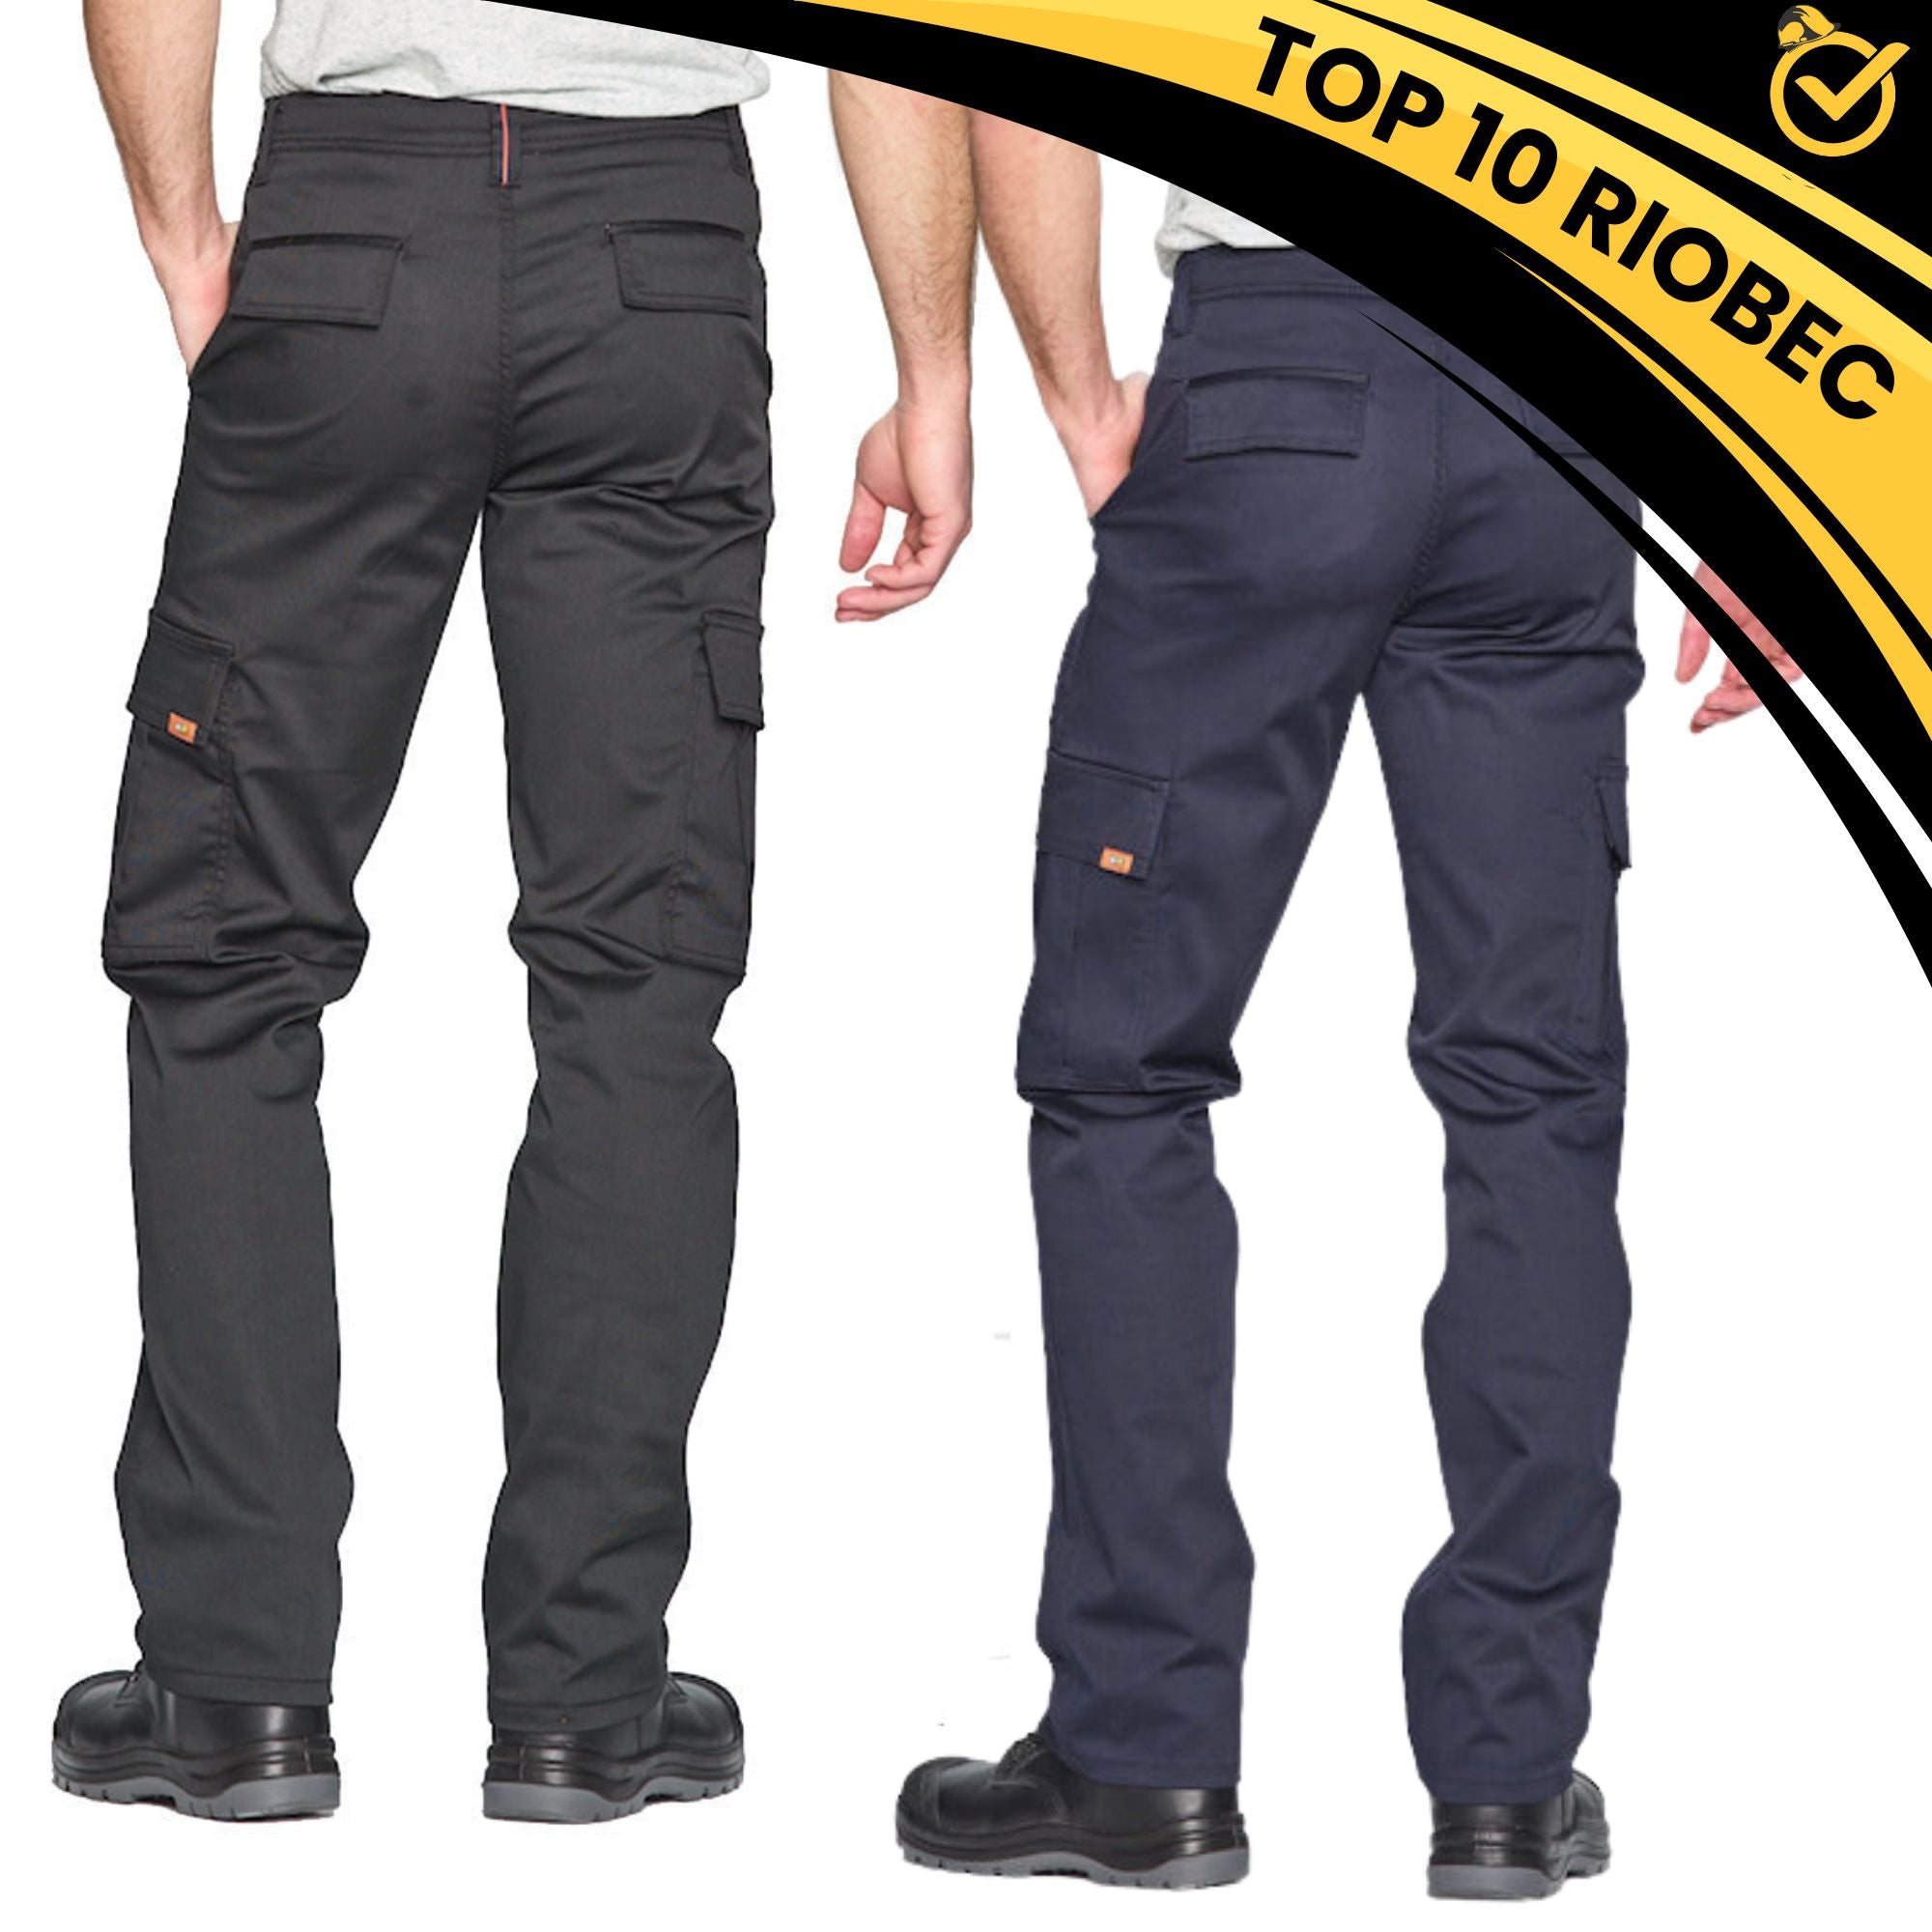 Stretch (cargo) or stretch working pants